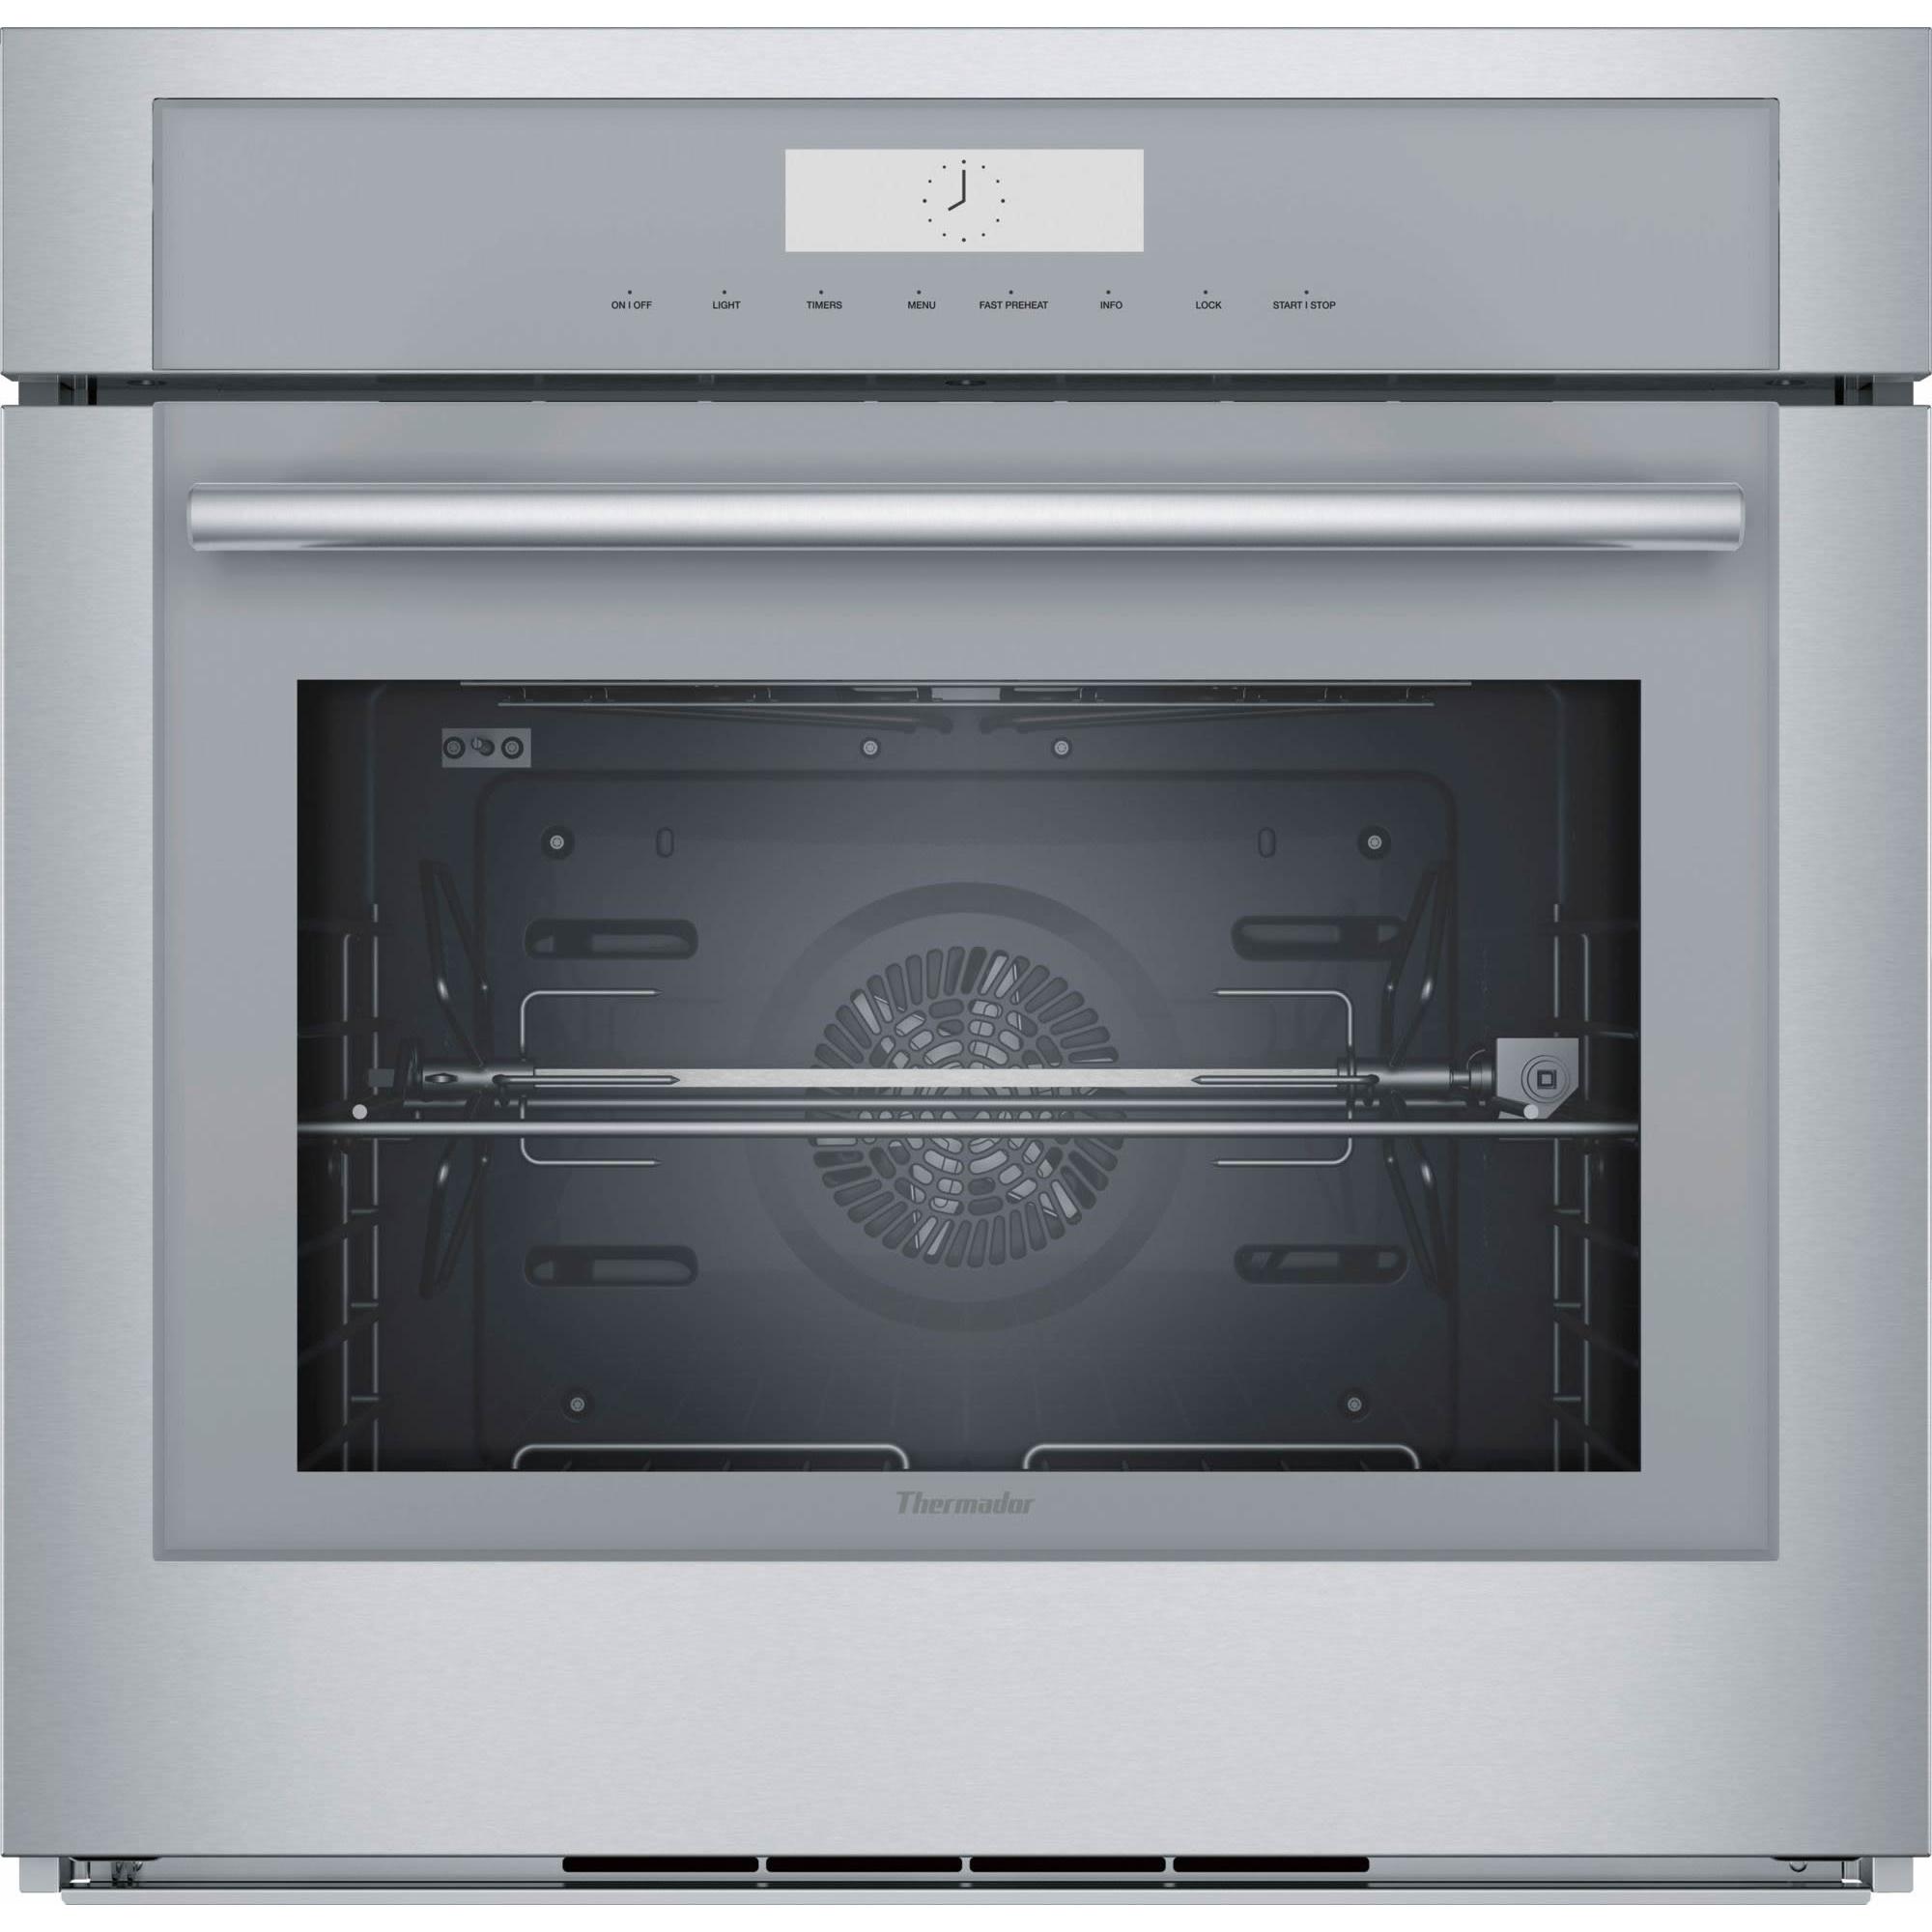 Thermador 30-inch, 4.5 cu.ft. Built-in Single Wall Oven with Home Connect MED301WS